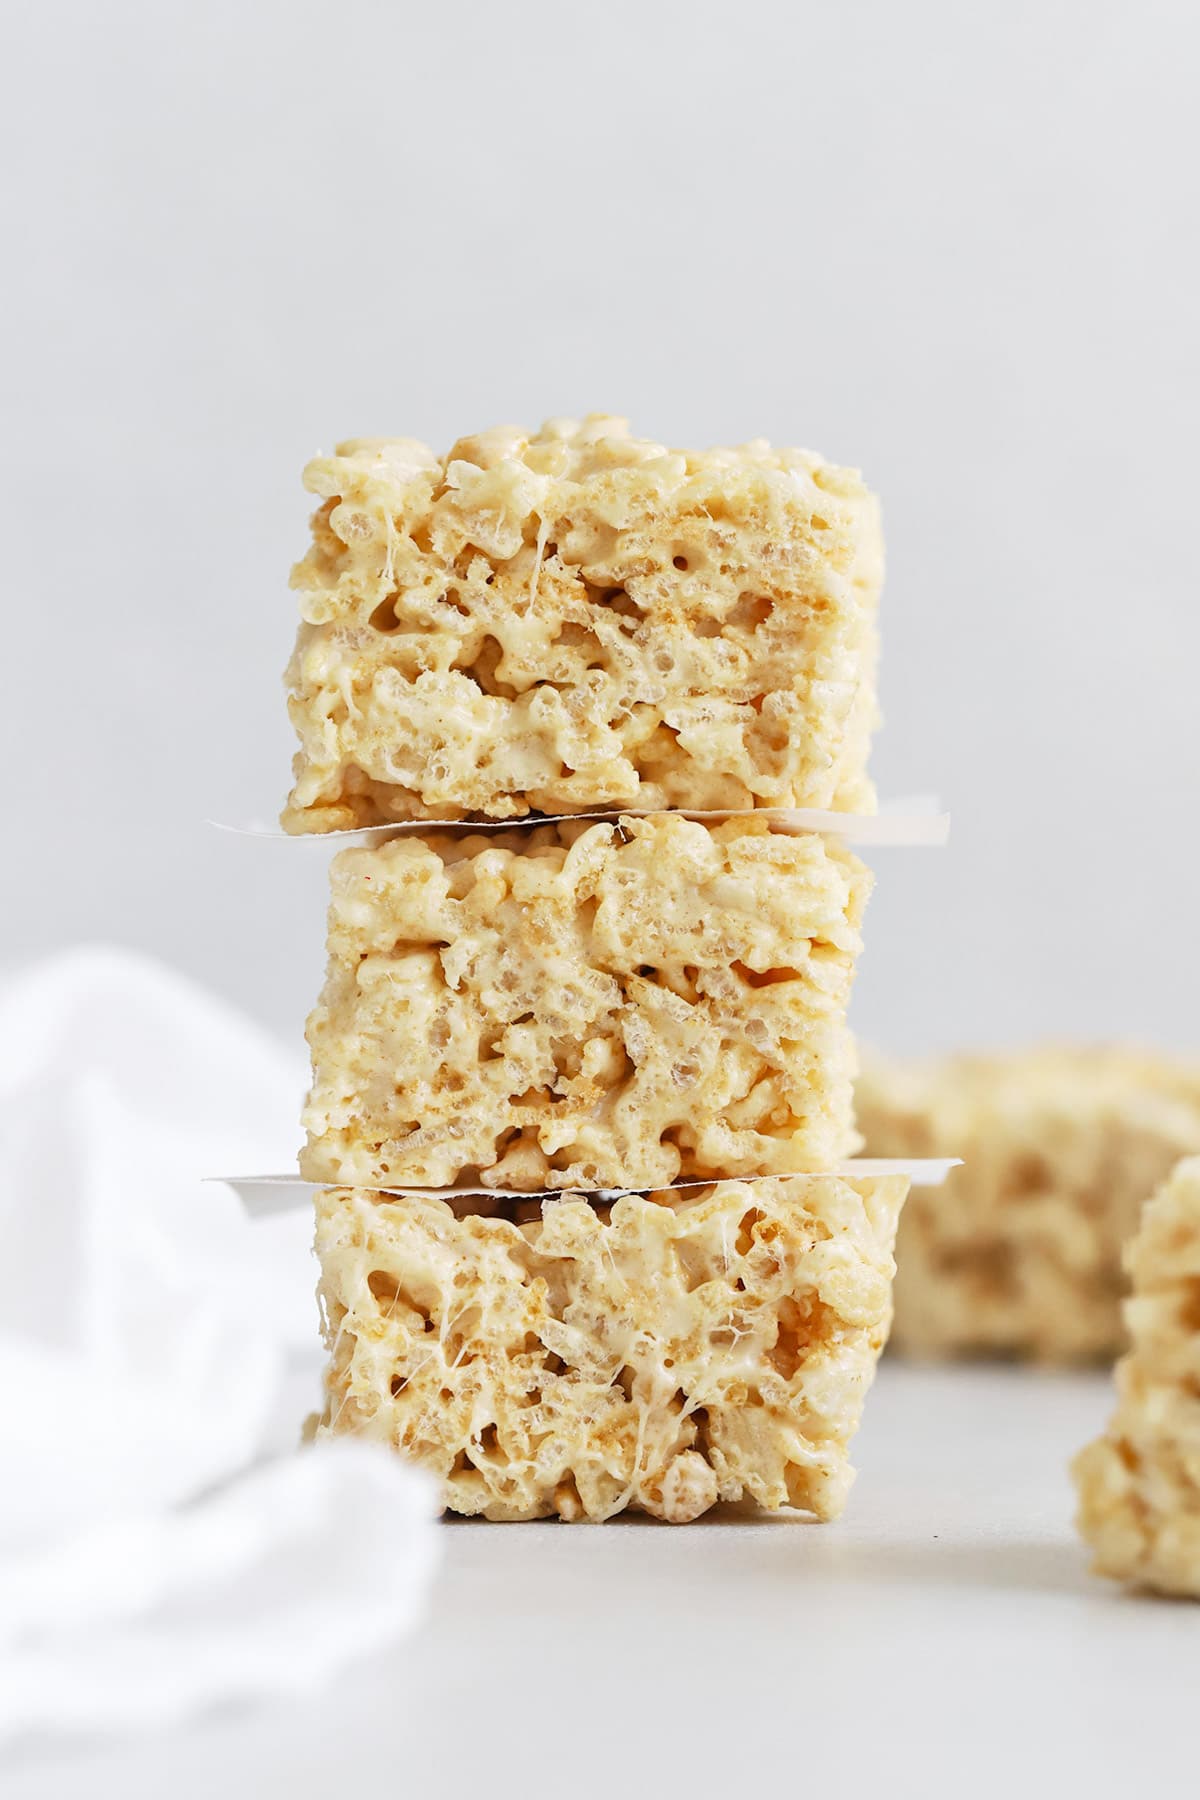 3 gluten-free brown butter rice krispies treats stacked on top of each other